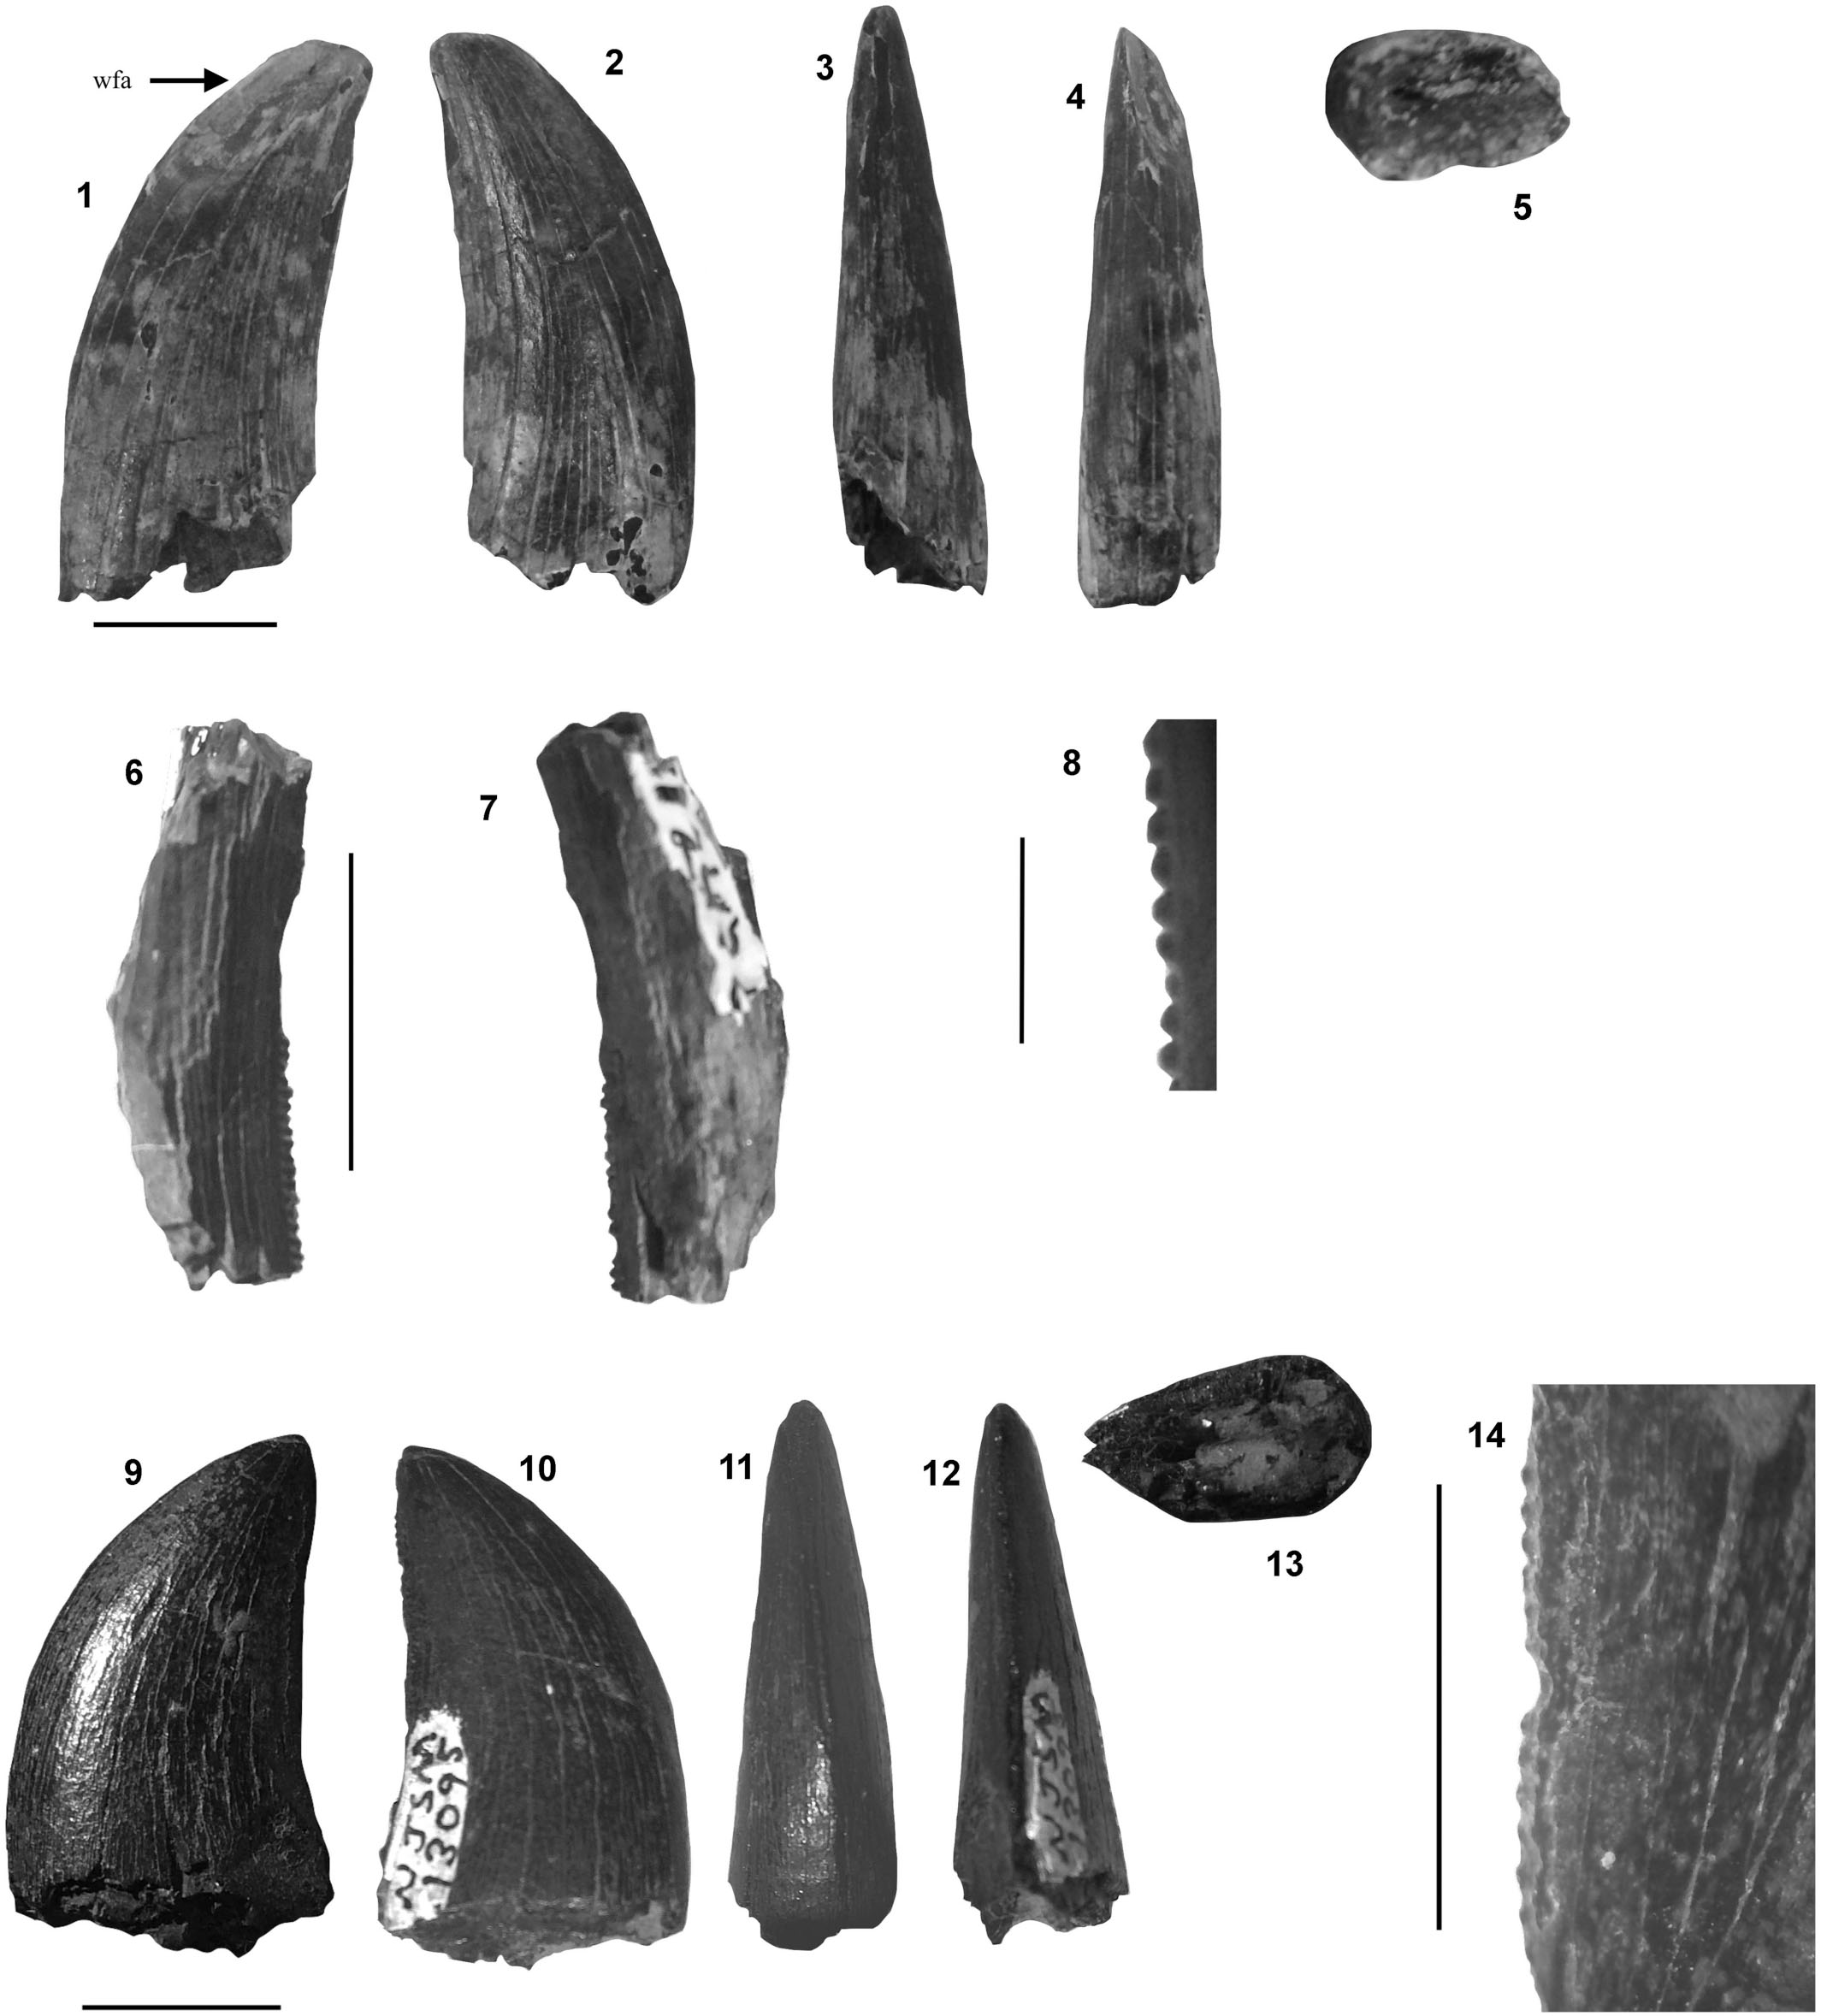 The distinctive theropod assemblage of the Ellisdale site of New Jersey ...